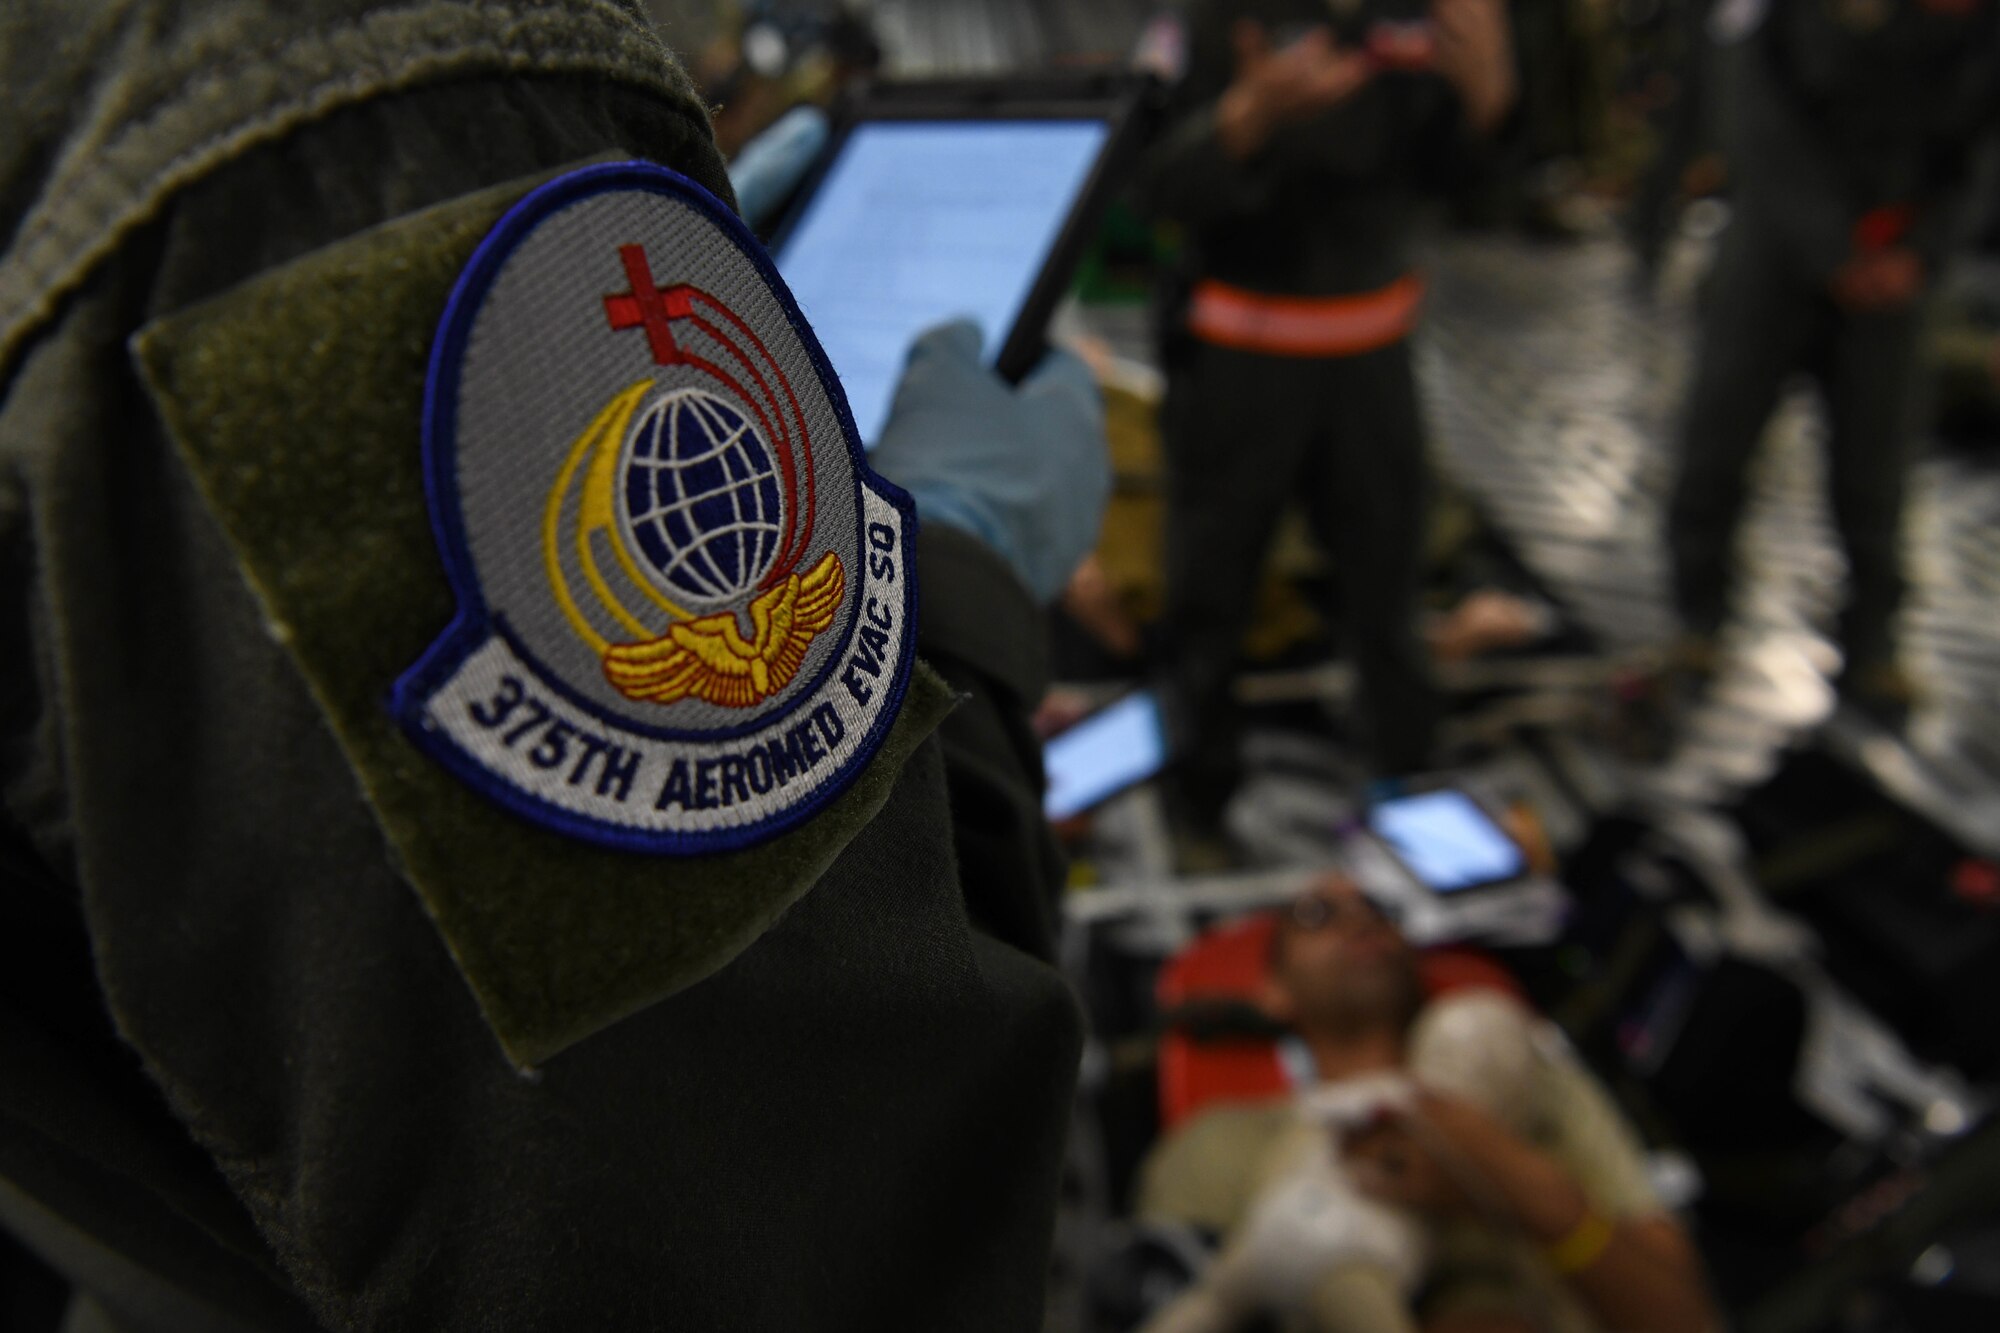 Patch sits affixed to arm of Airman